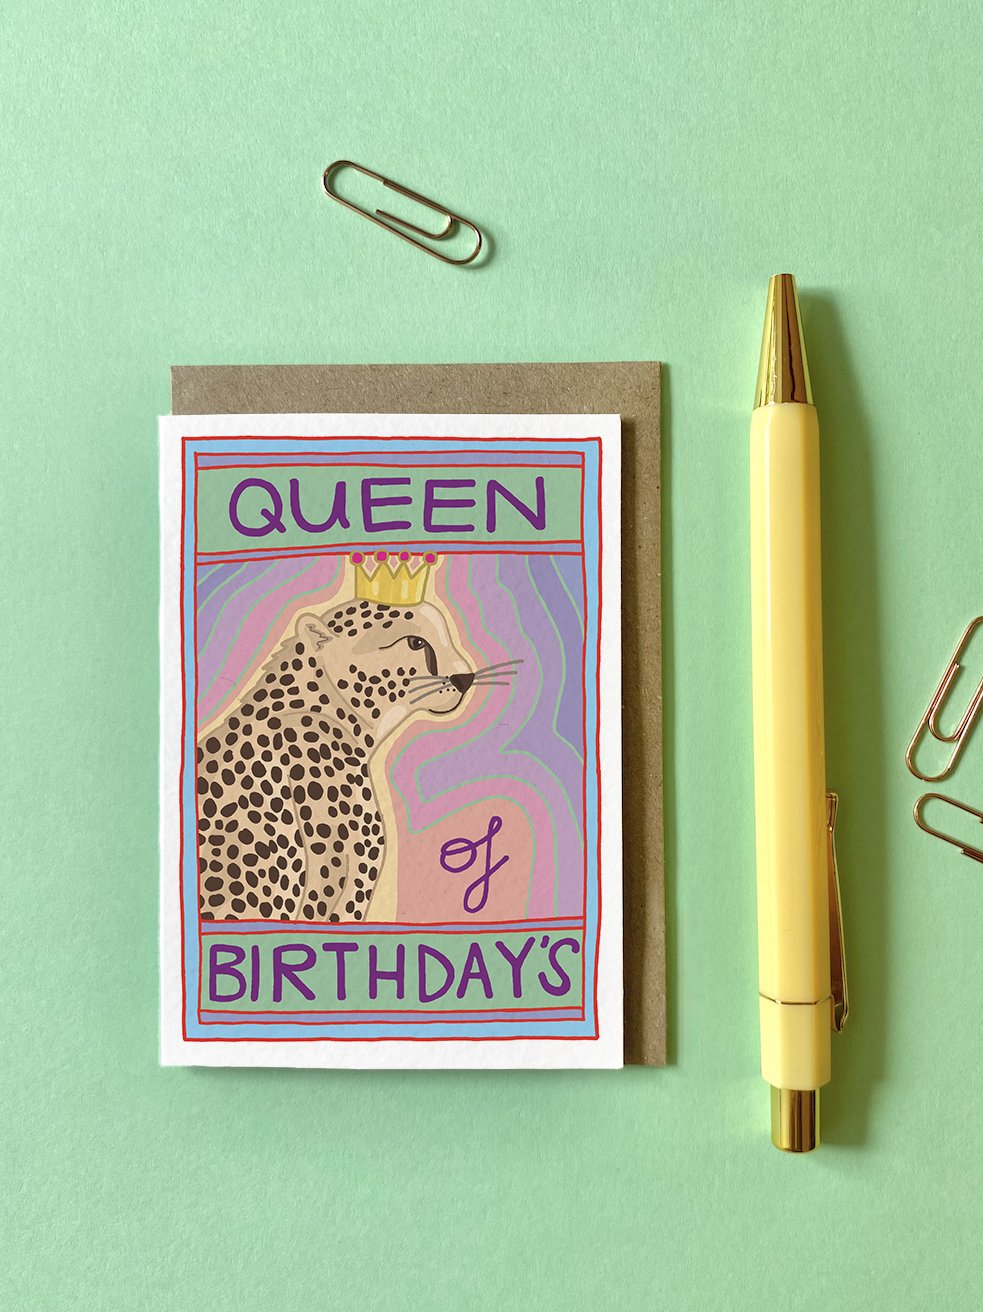 You've got pen on your face Queen of birthdays card